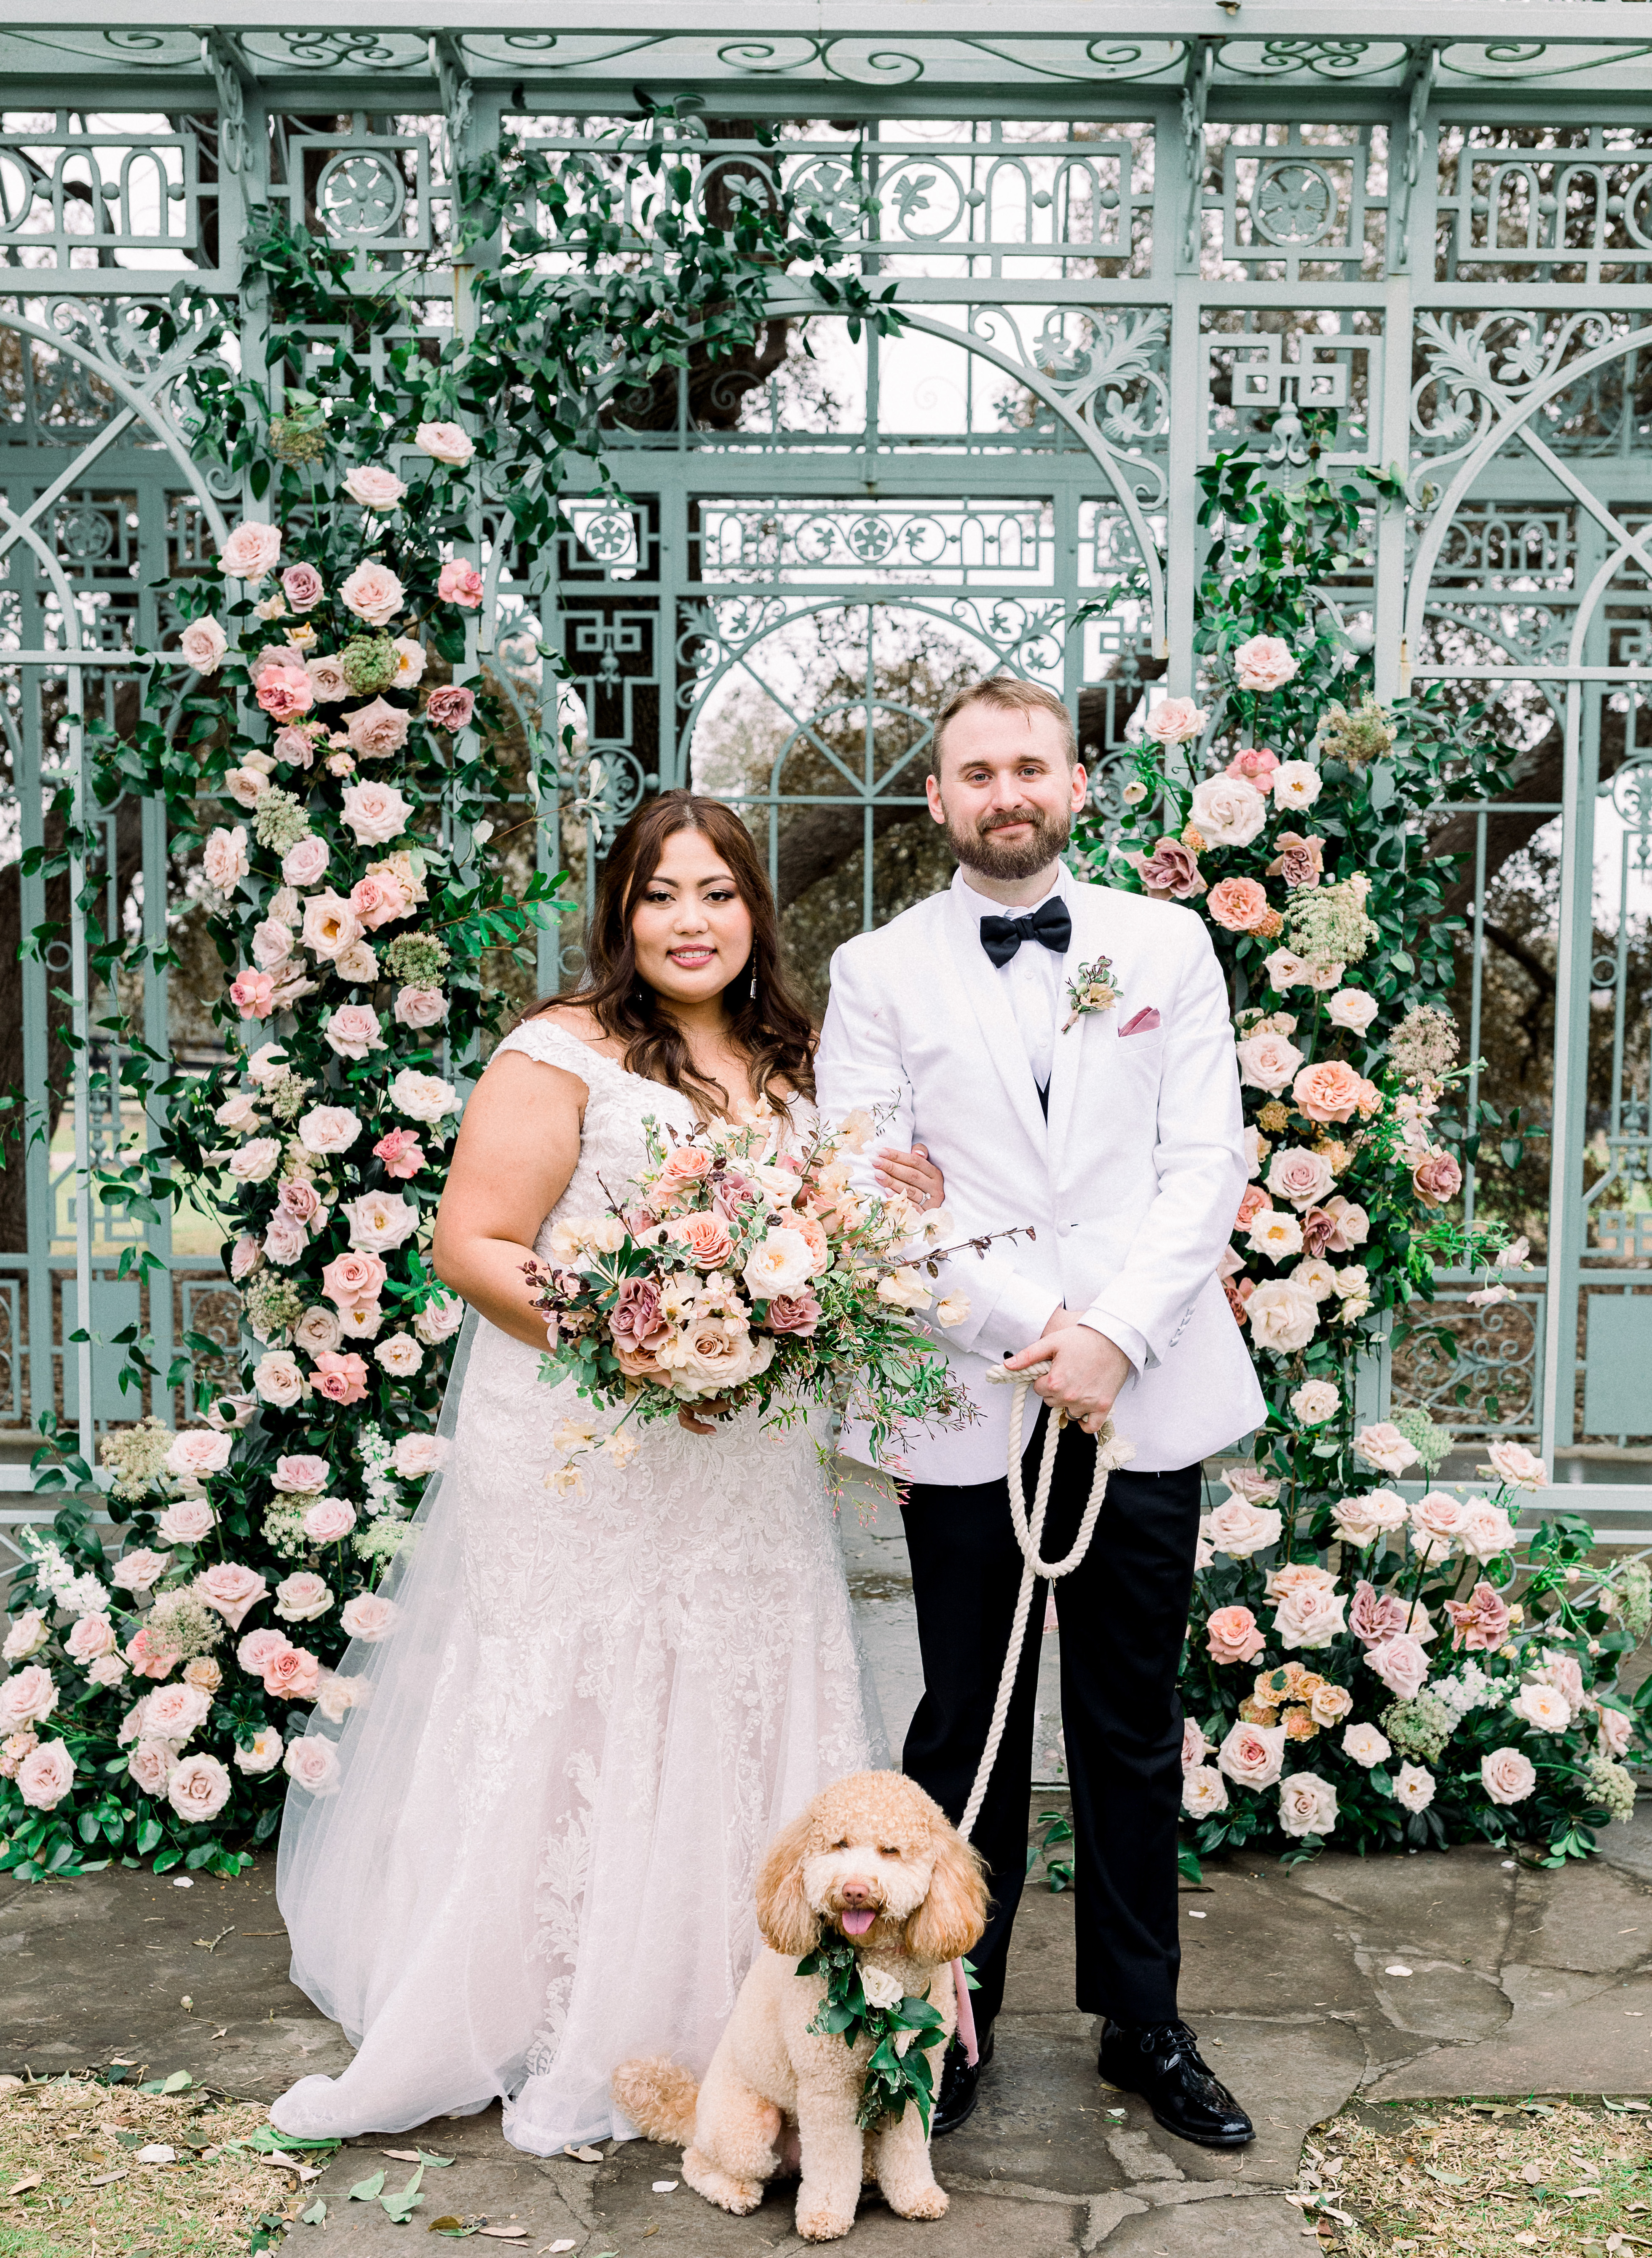 The bride and groom stand in front of an antique french gazebo decorated with blush florals and greenery, with their pet miniature Goldendoodle, for their romantic al fresco wedding ceremony in Dripping Springs, Texas at wedding venue, Ma Maison.